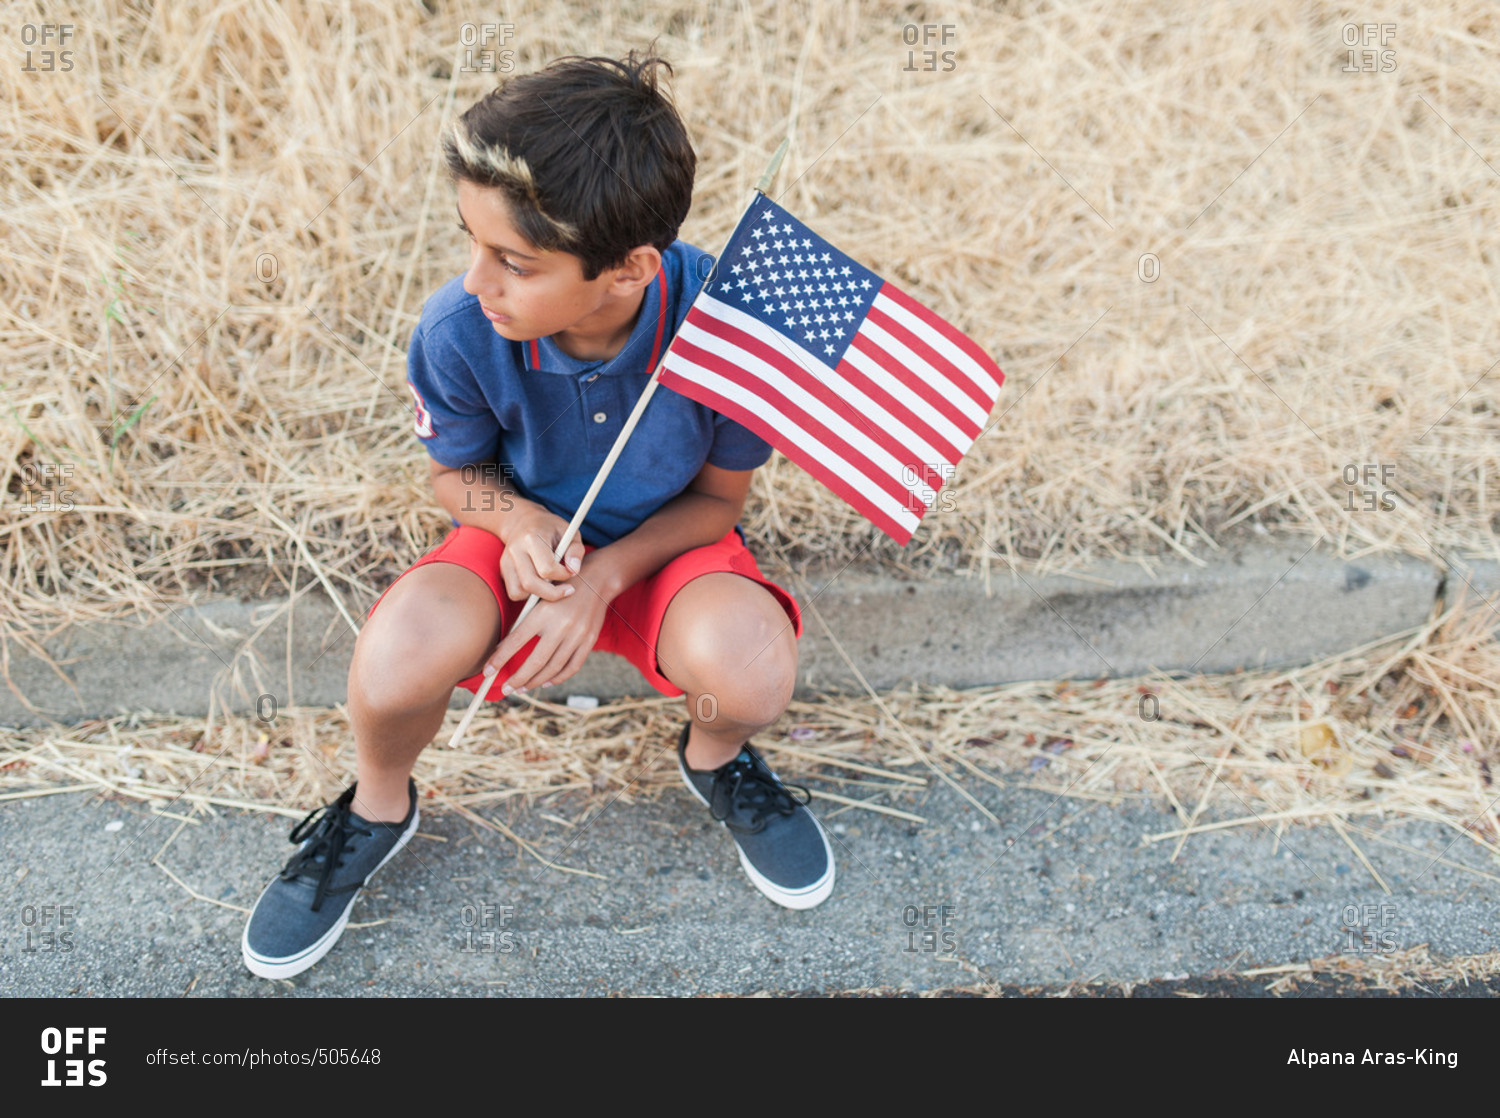 High angle view of a boy sitting on a curb holding American flag